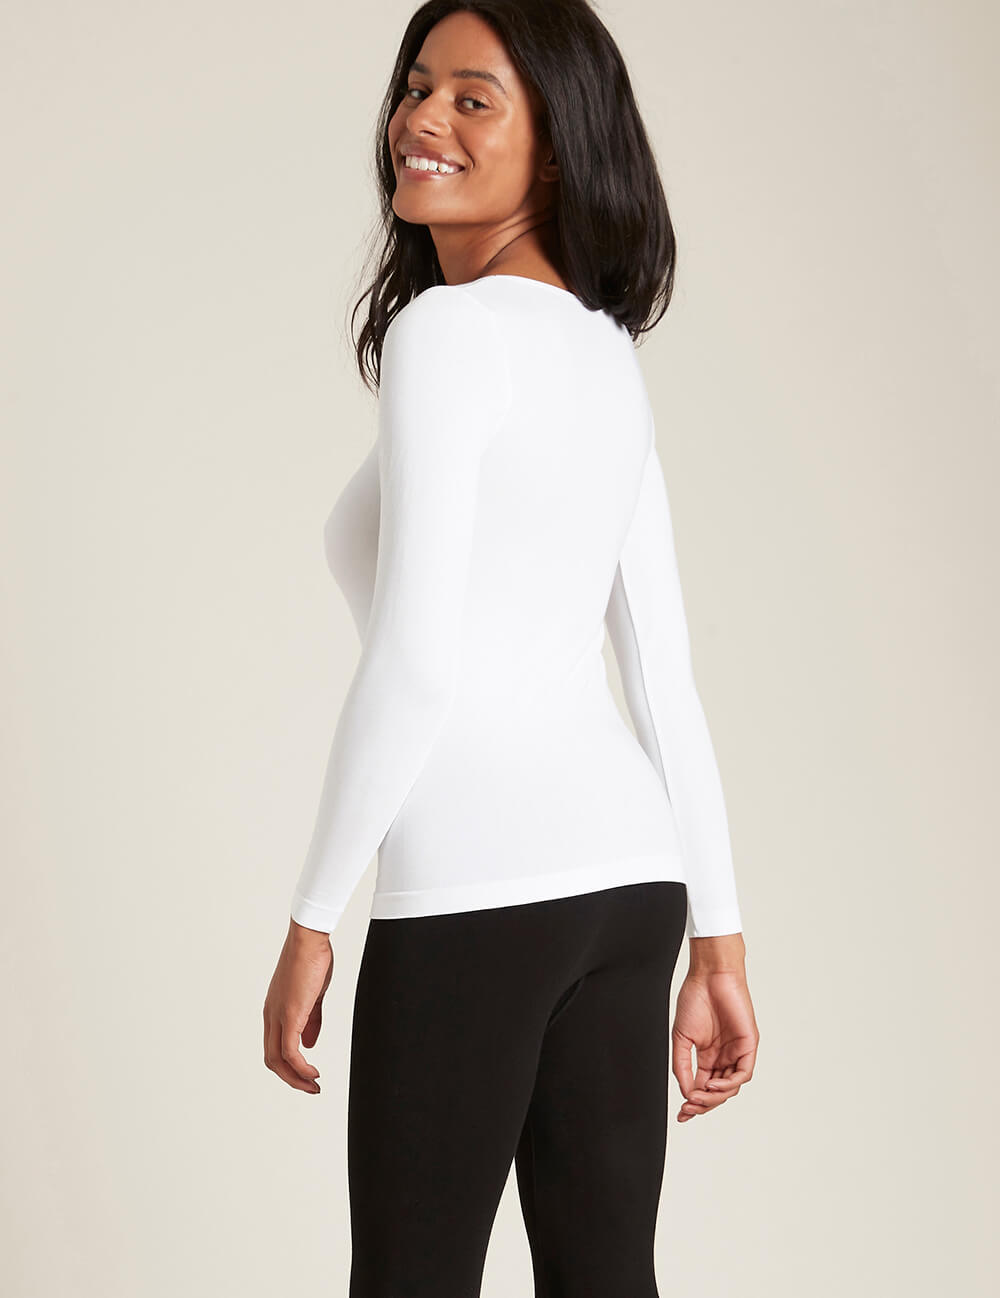 Boody Bamboo Women's Long Sleeve Top in White Back View